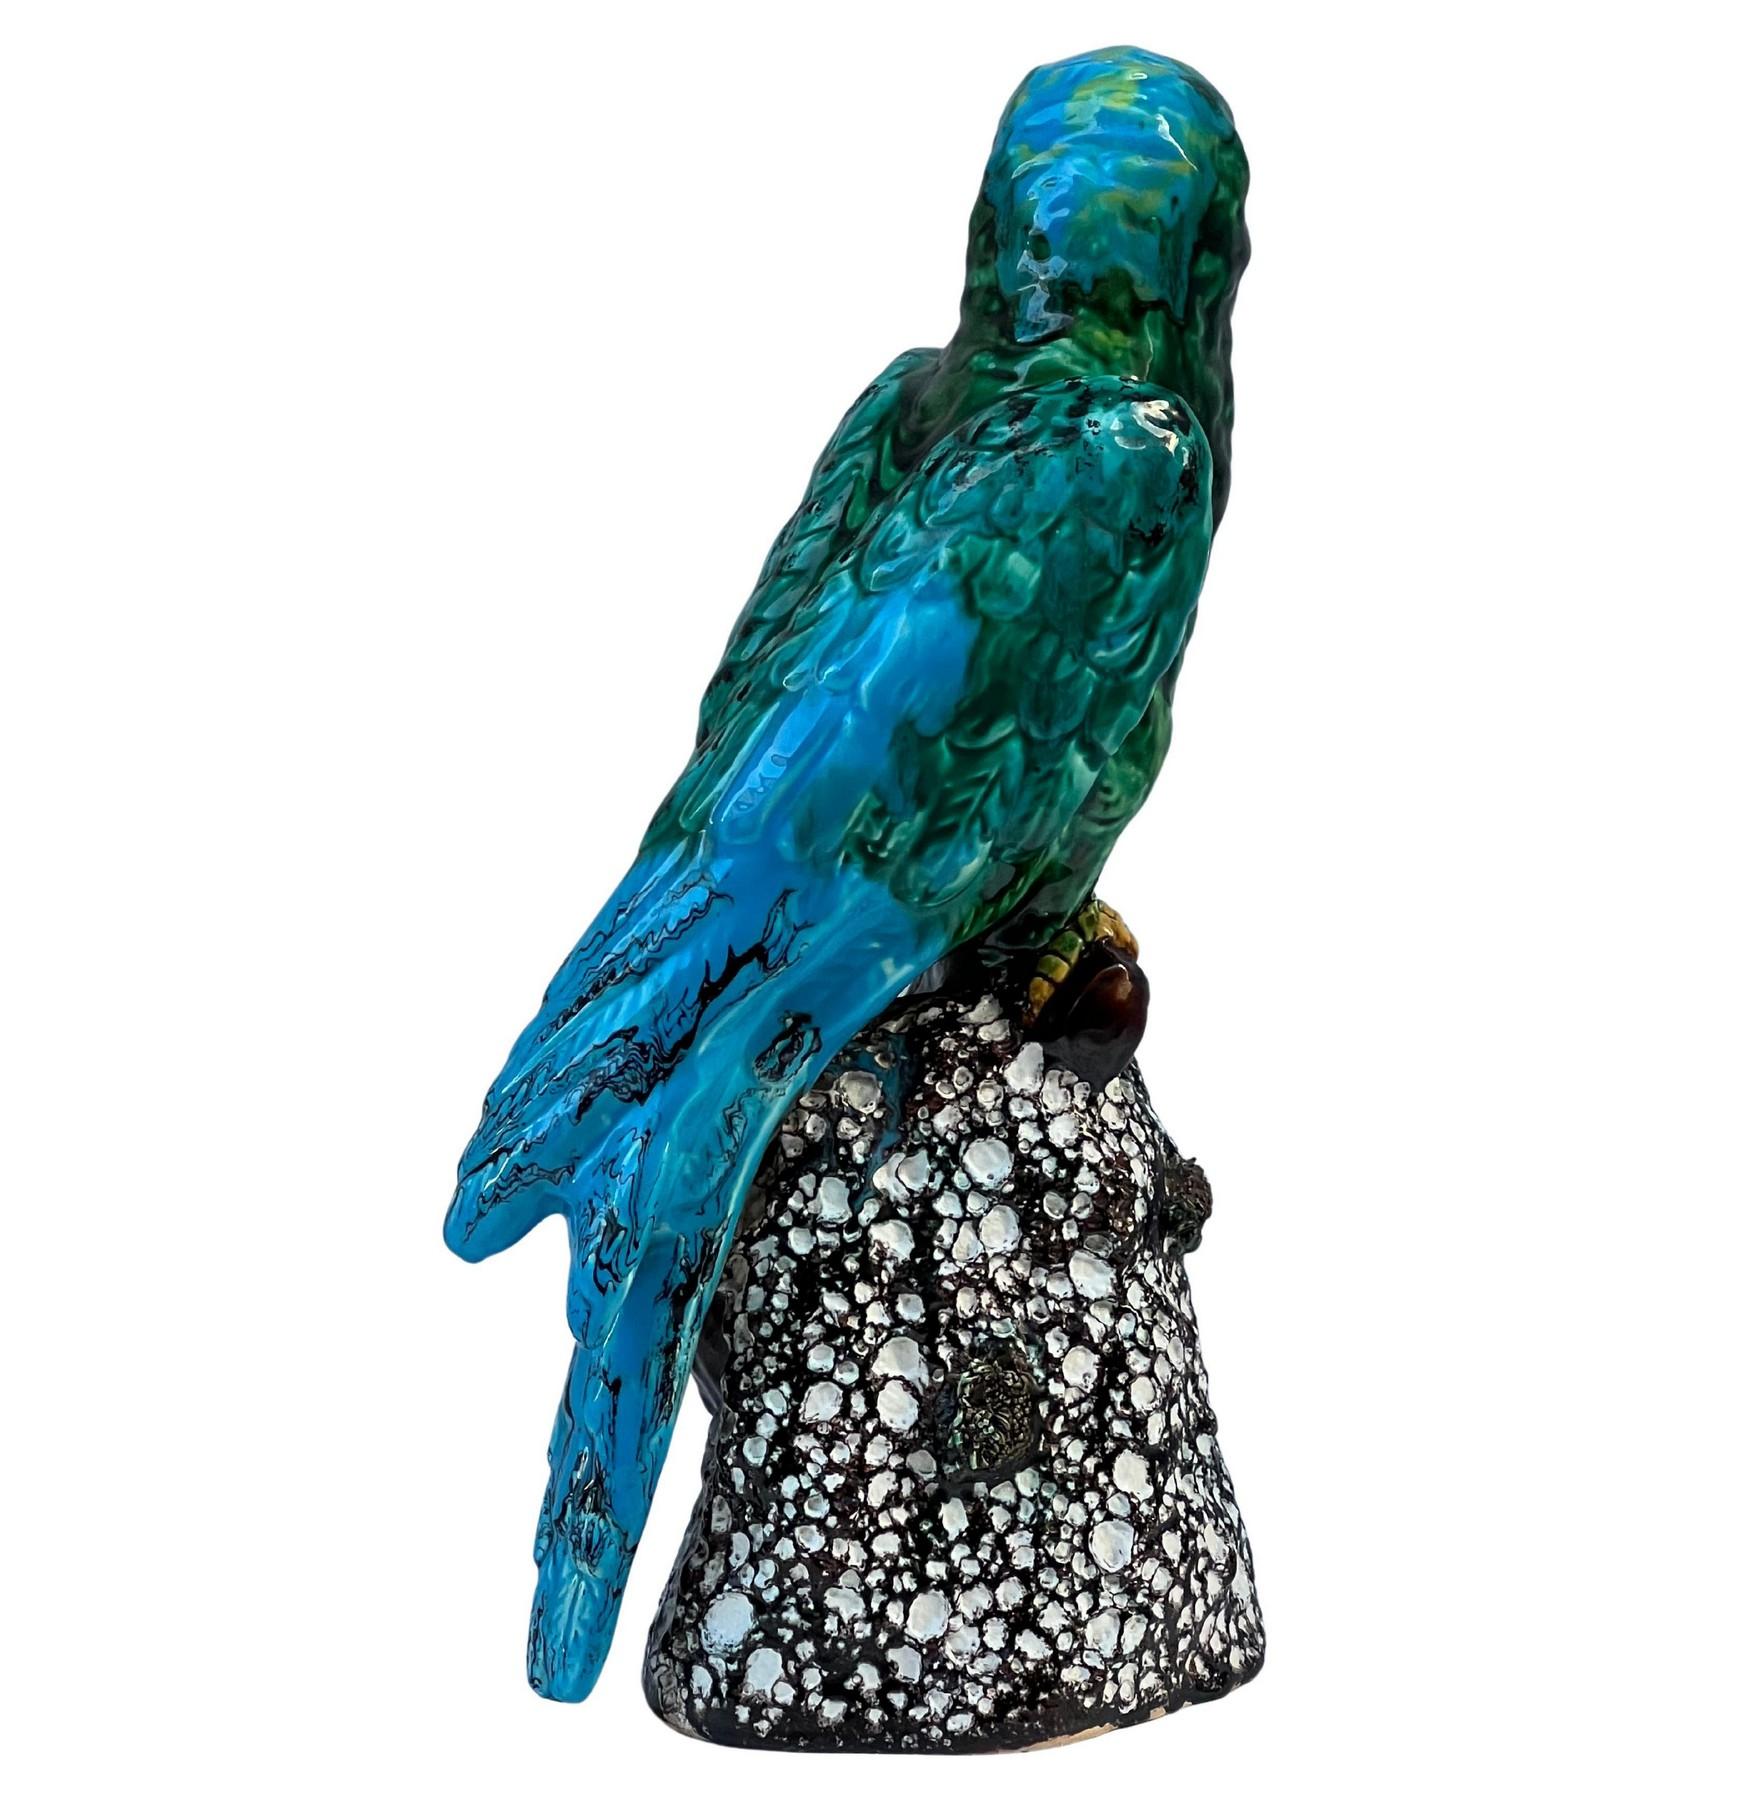 French Parrot by Louis Giraud, Vallauris, Around 1960